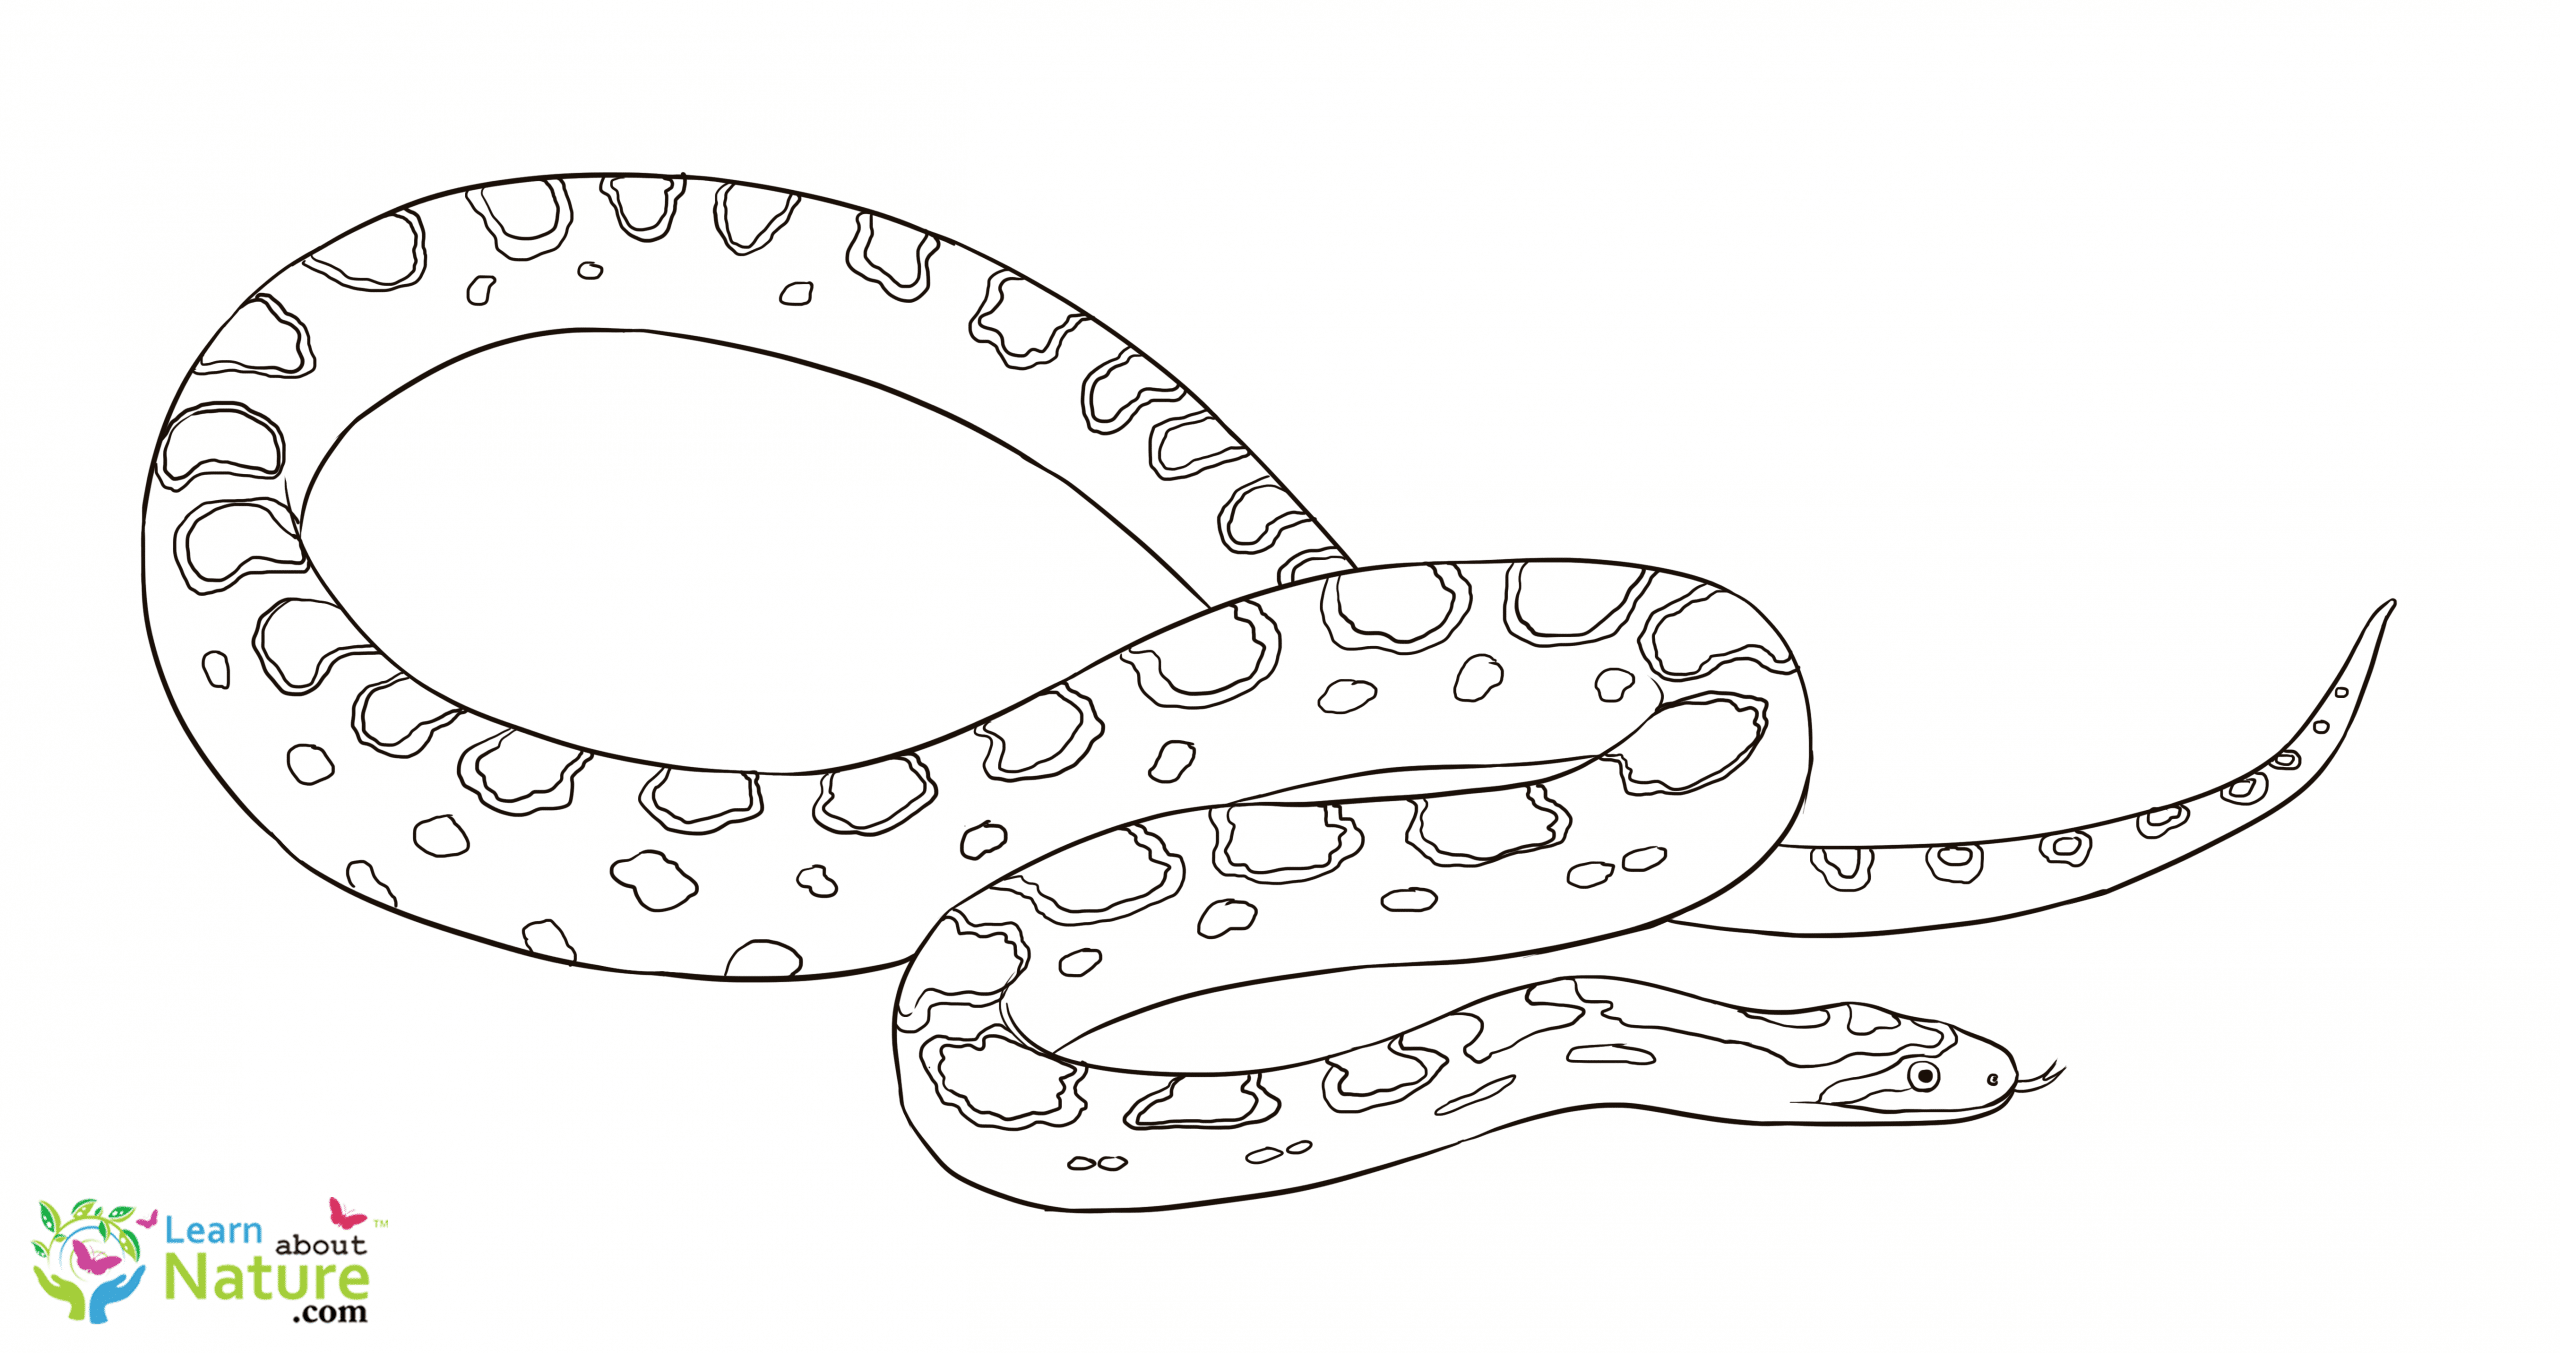 Download snake-coloring-page-9 - Learn About Nature